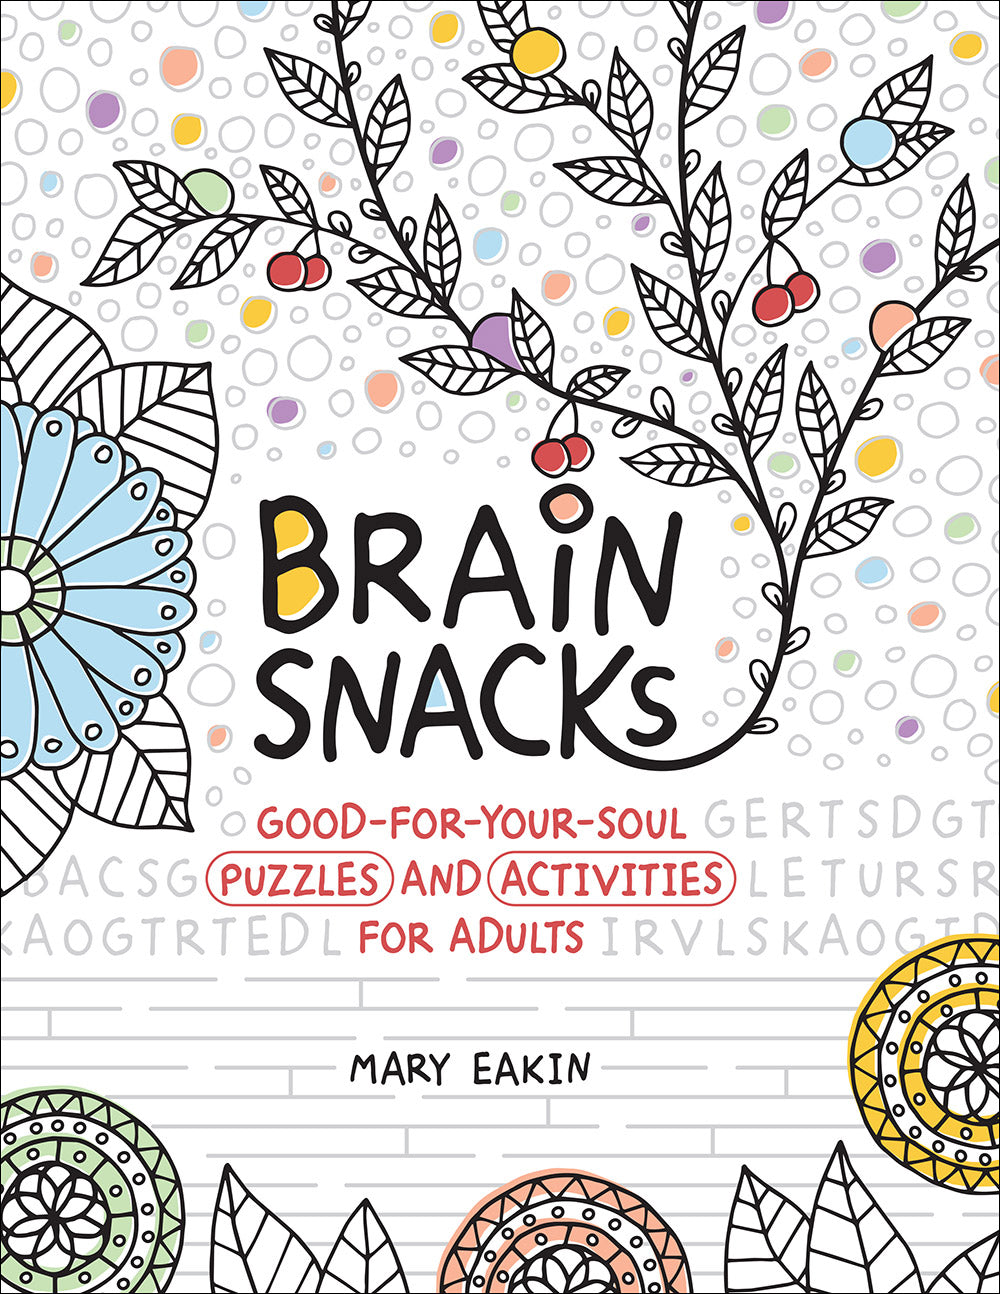 Image of Brain Snacks other